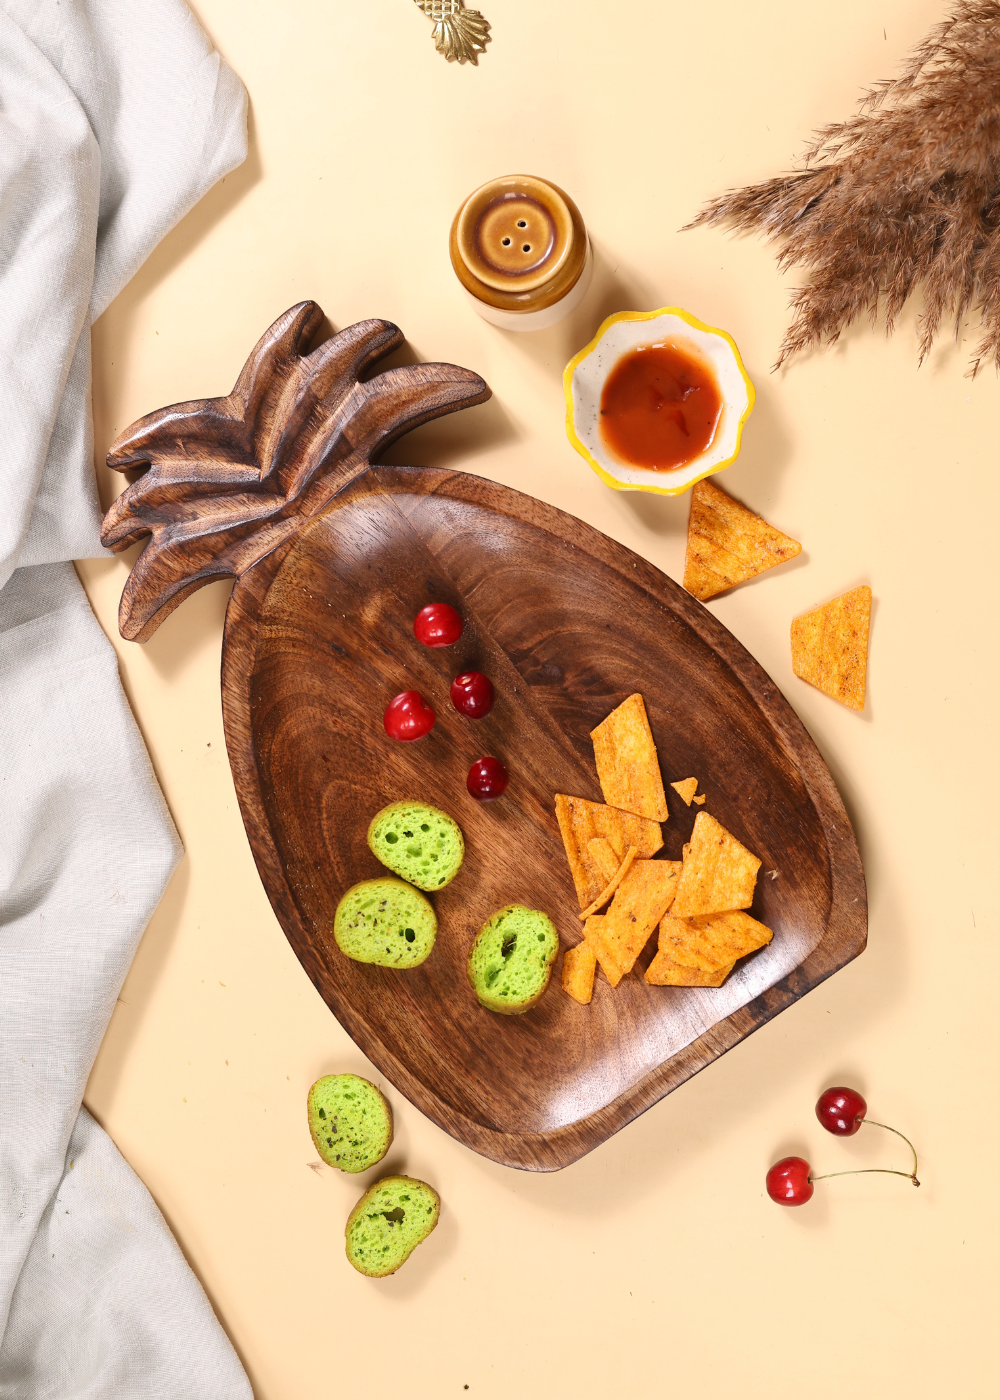 Wooden Pineapple Platter With Snacks